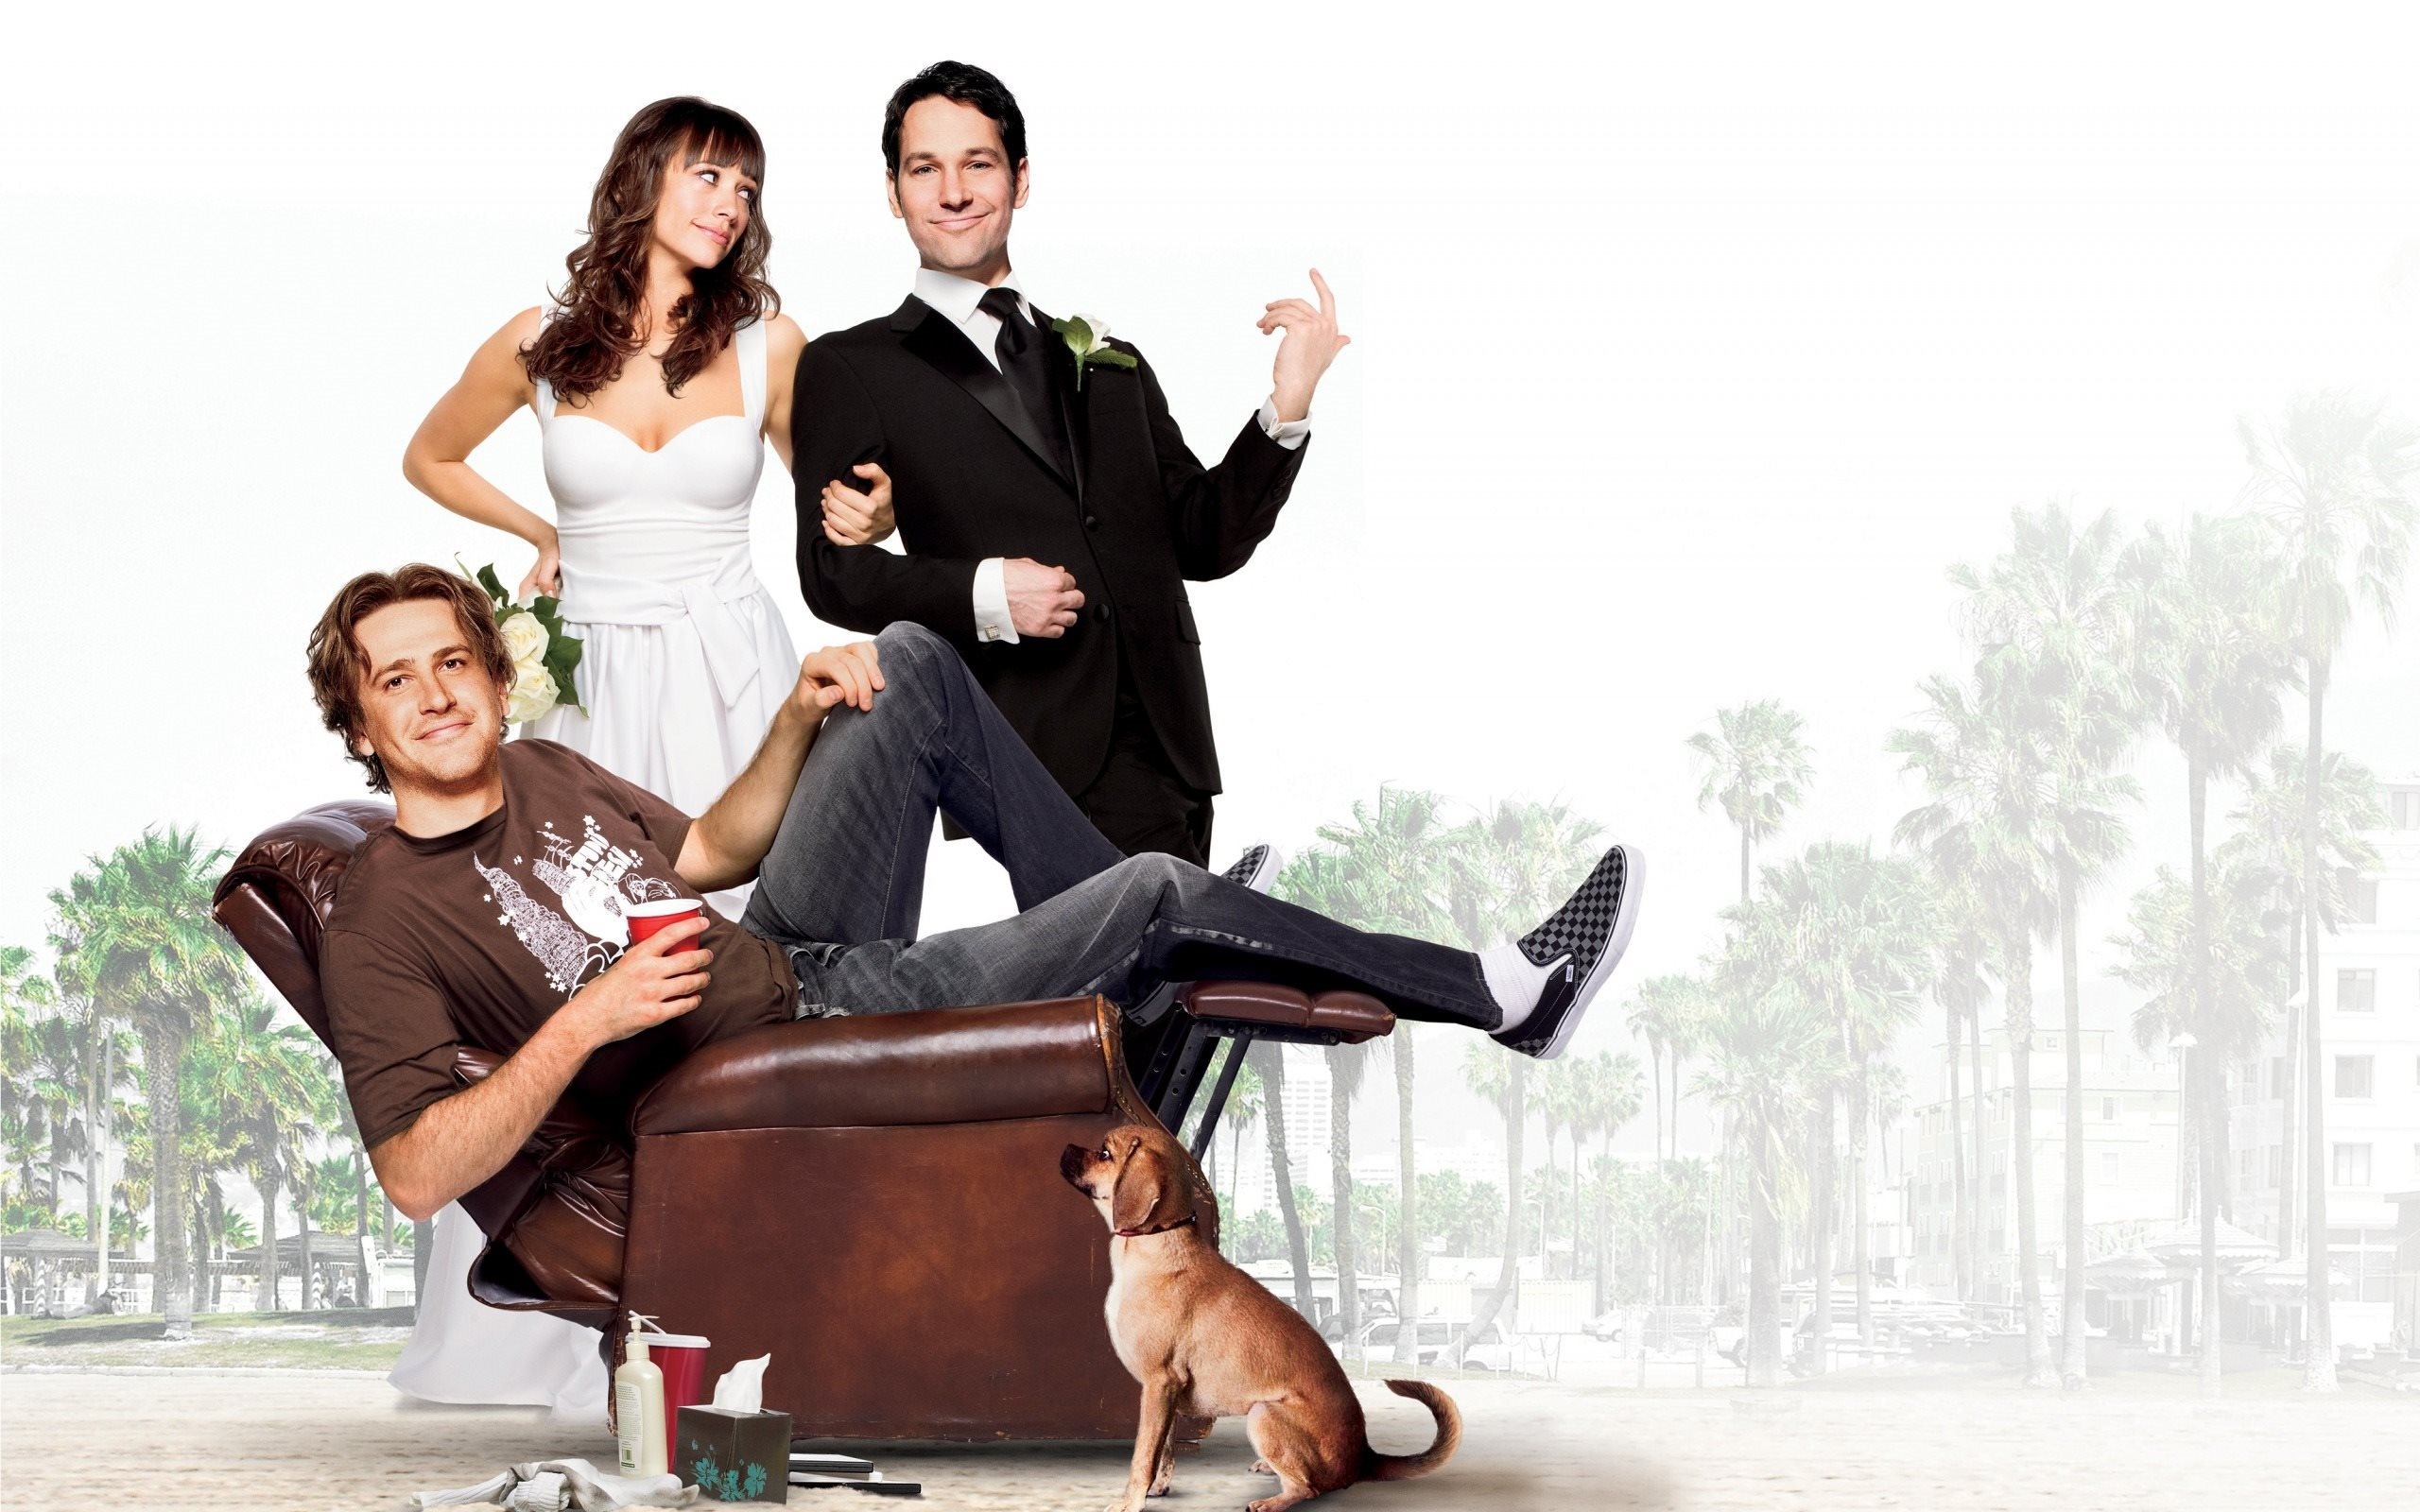 Paul Rudd: Was cast as Peter Klaven in a 2009 bromantic comedy film, I Love You, Man. 2560x1600 HD Background.